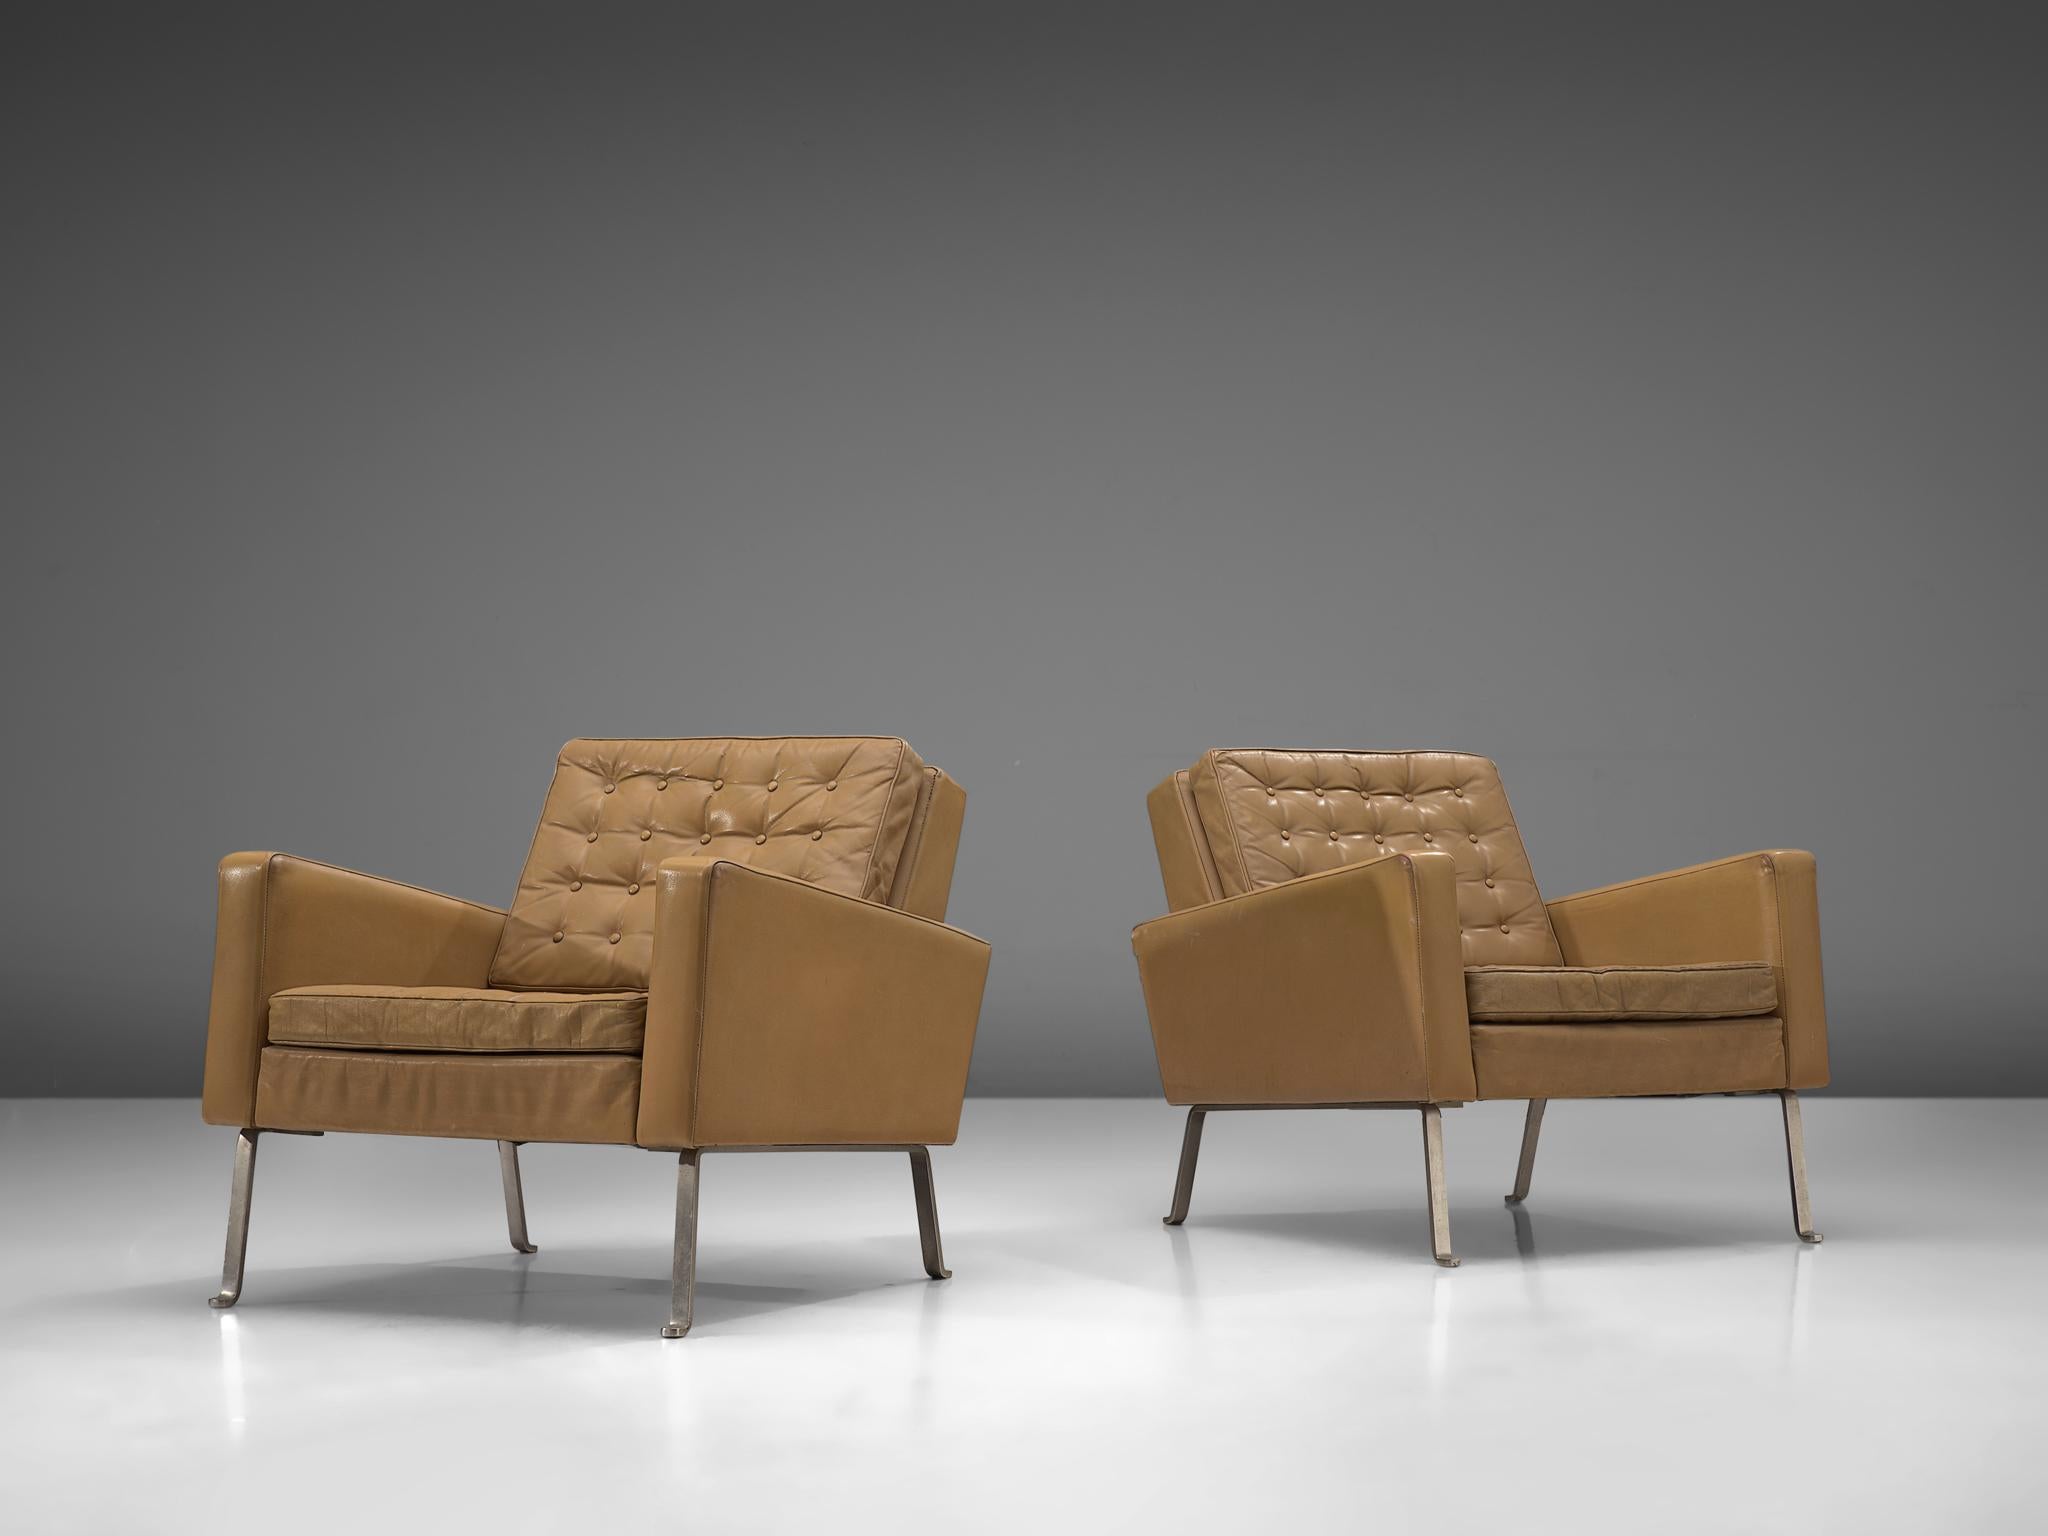 Roland Ranier, pair of lounge chairs, leather, steel, Austria, 1950s

Modern and beautiful armchairs. These chairs form an extraordinary stately set, being both crisp and warm at the same time. The steel frame holds a brown beige leather body with